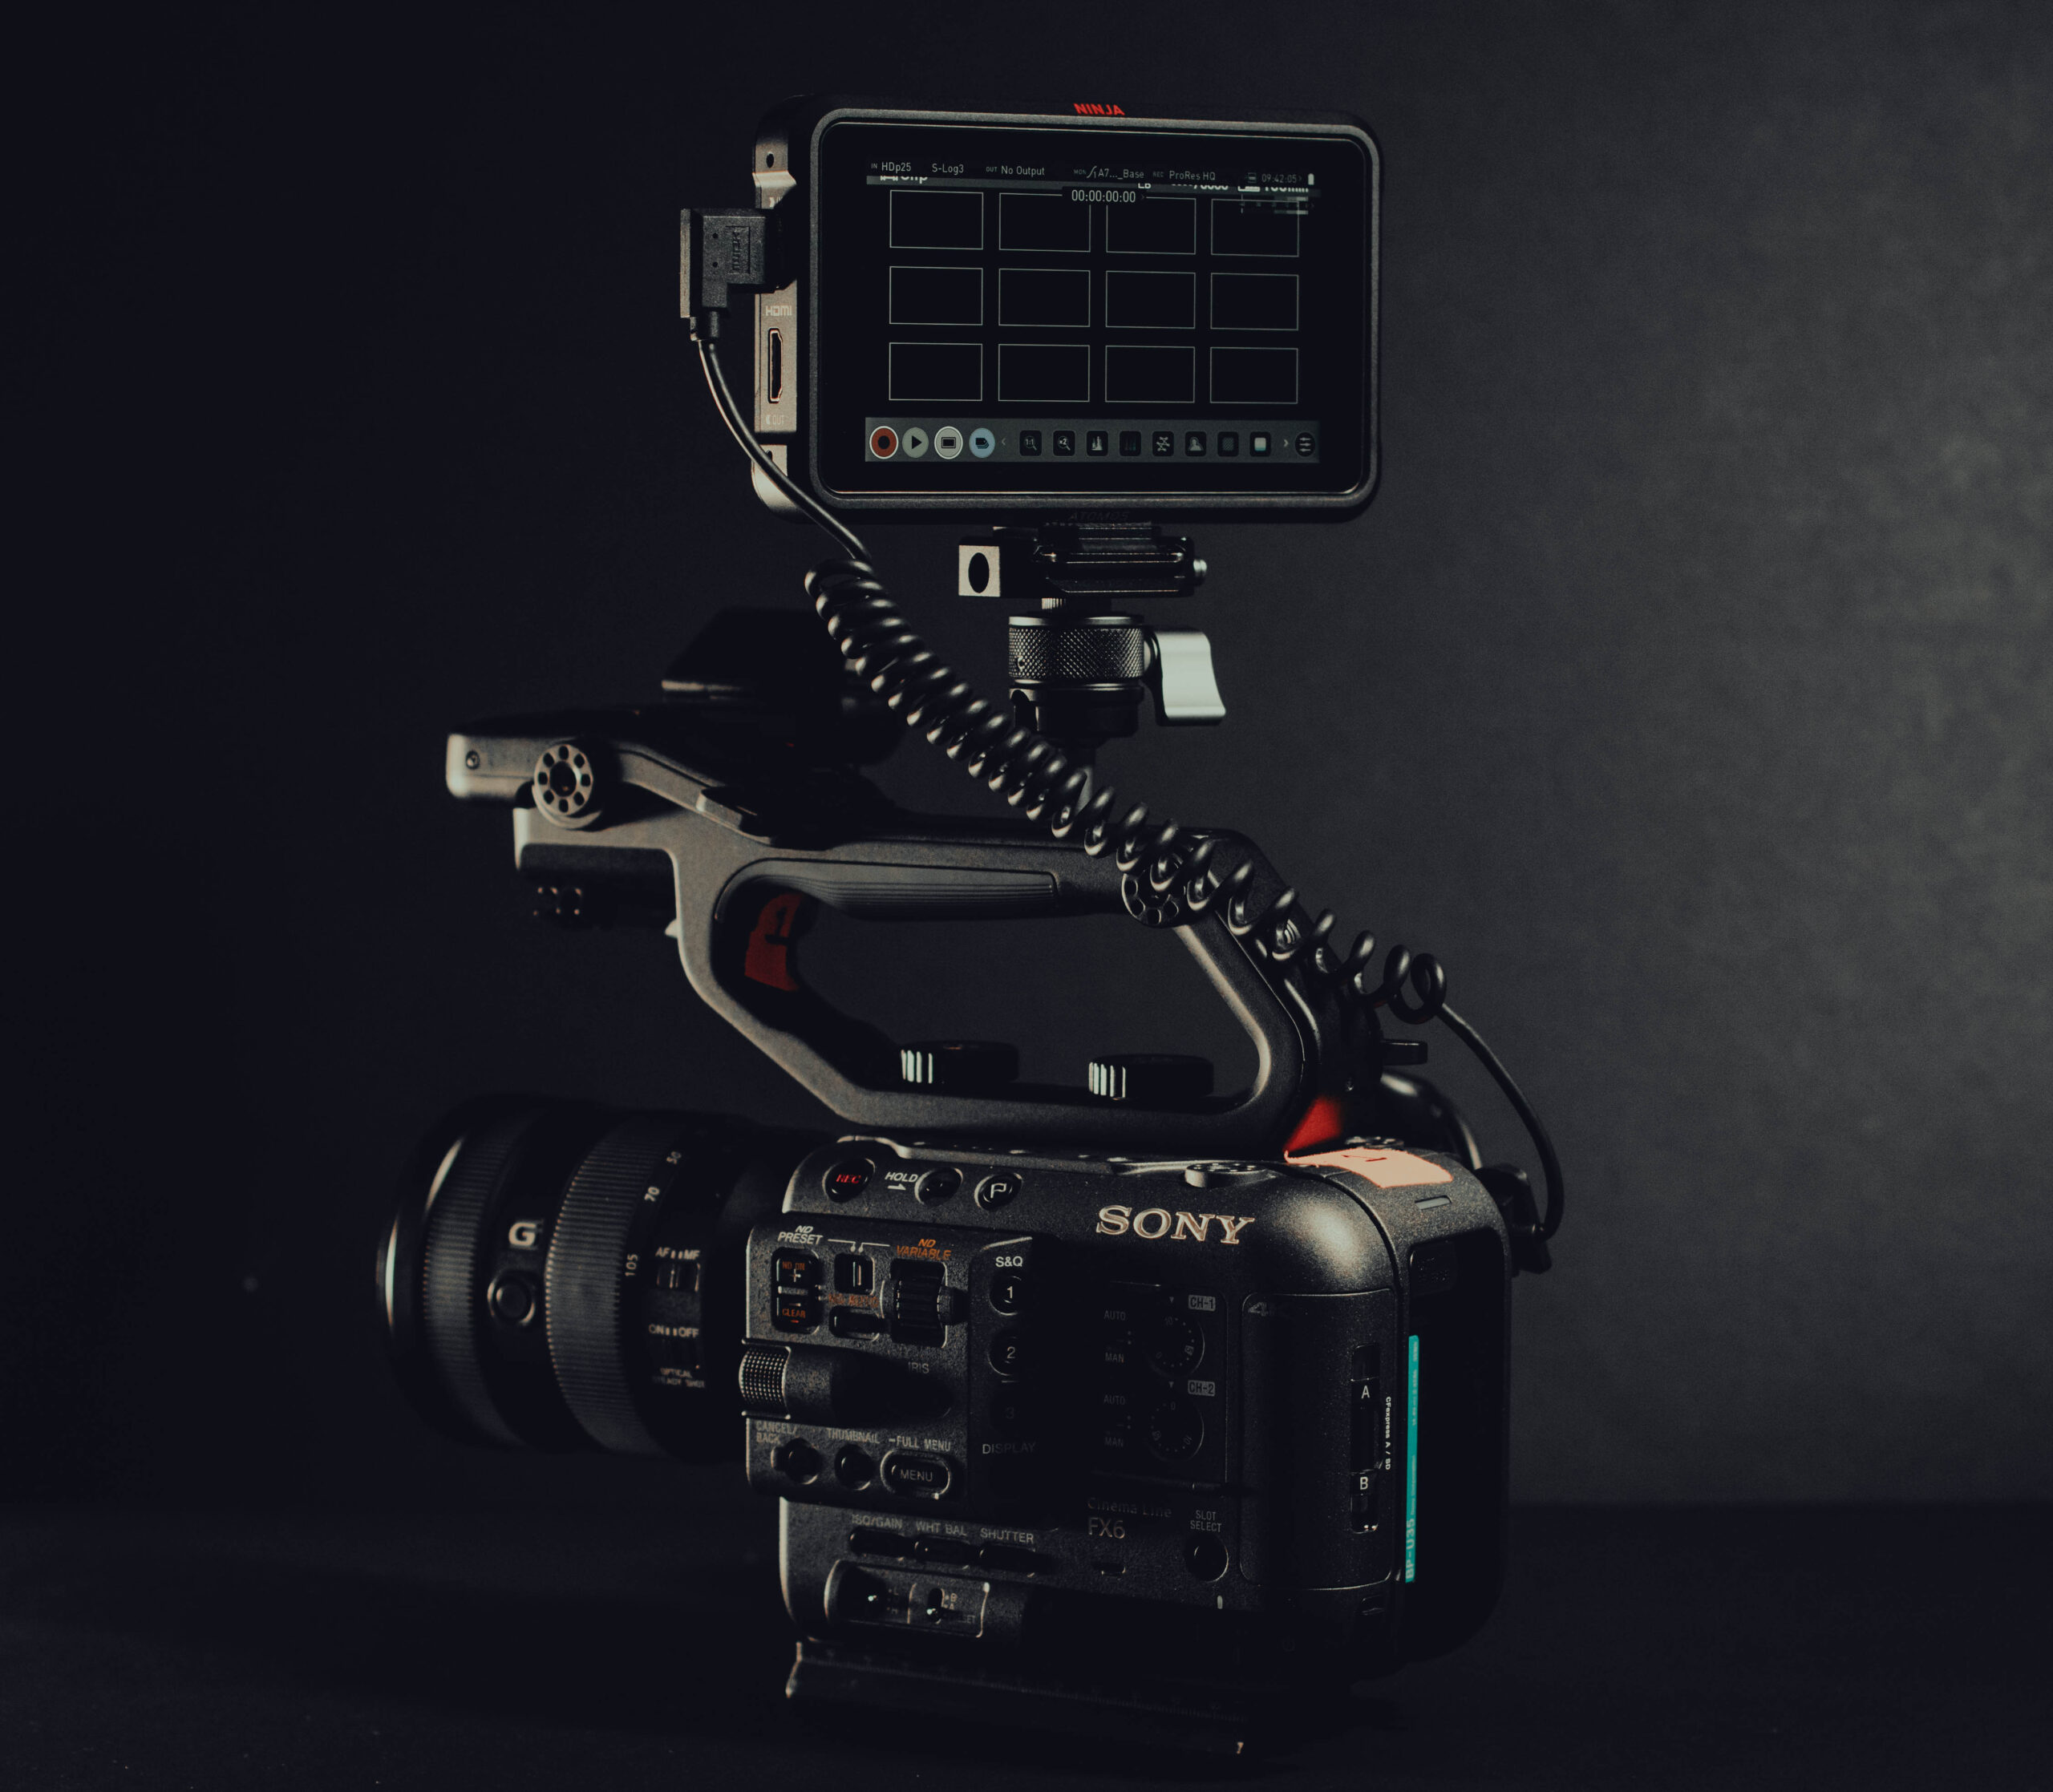 Ninja V Atomos mounter on our Sony FX6 camera. Available on discount in our Camera hire shop in Cardiff.